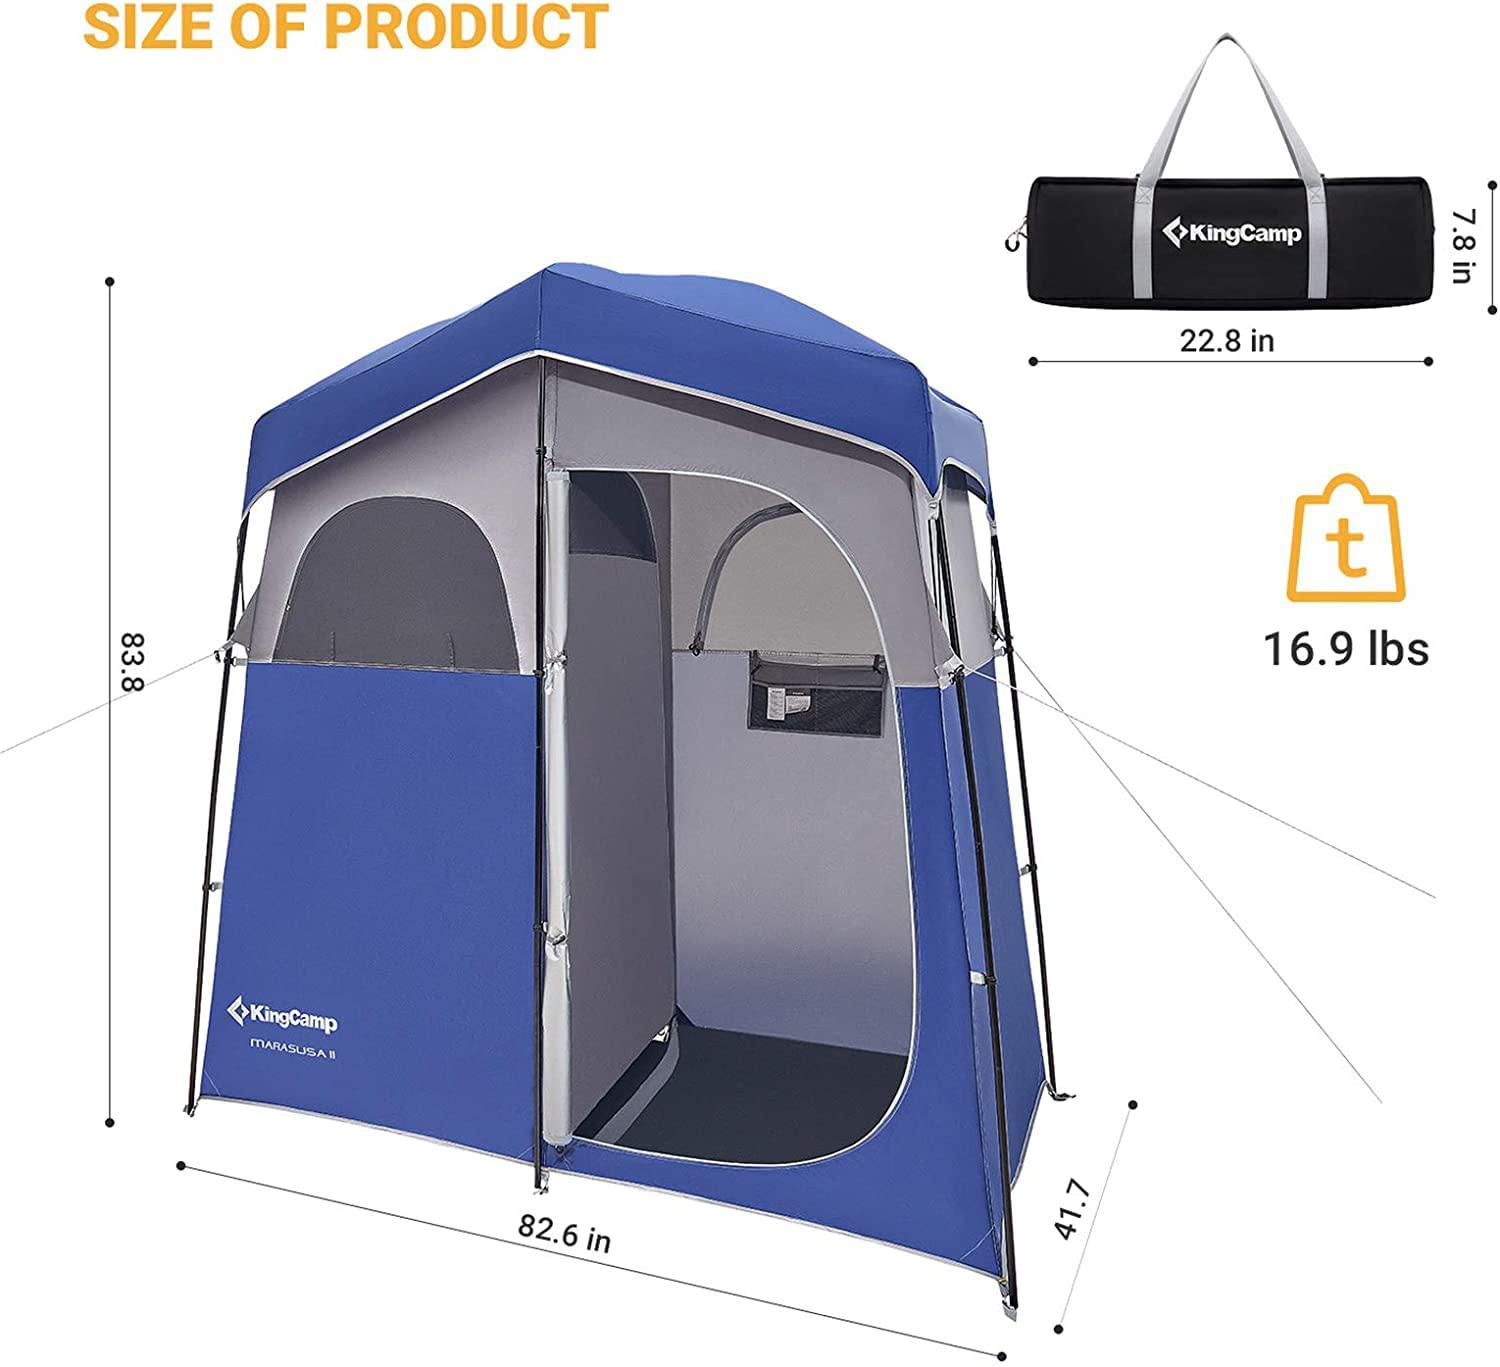 kingcamp outdoor privacy double shower tents dressing room portable shelter picnic fishing bathroom rain shelter with window 